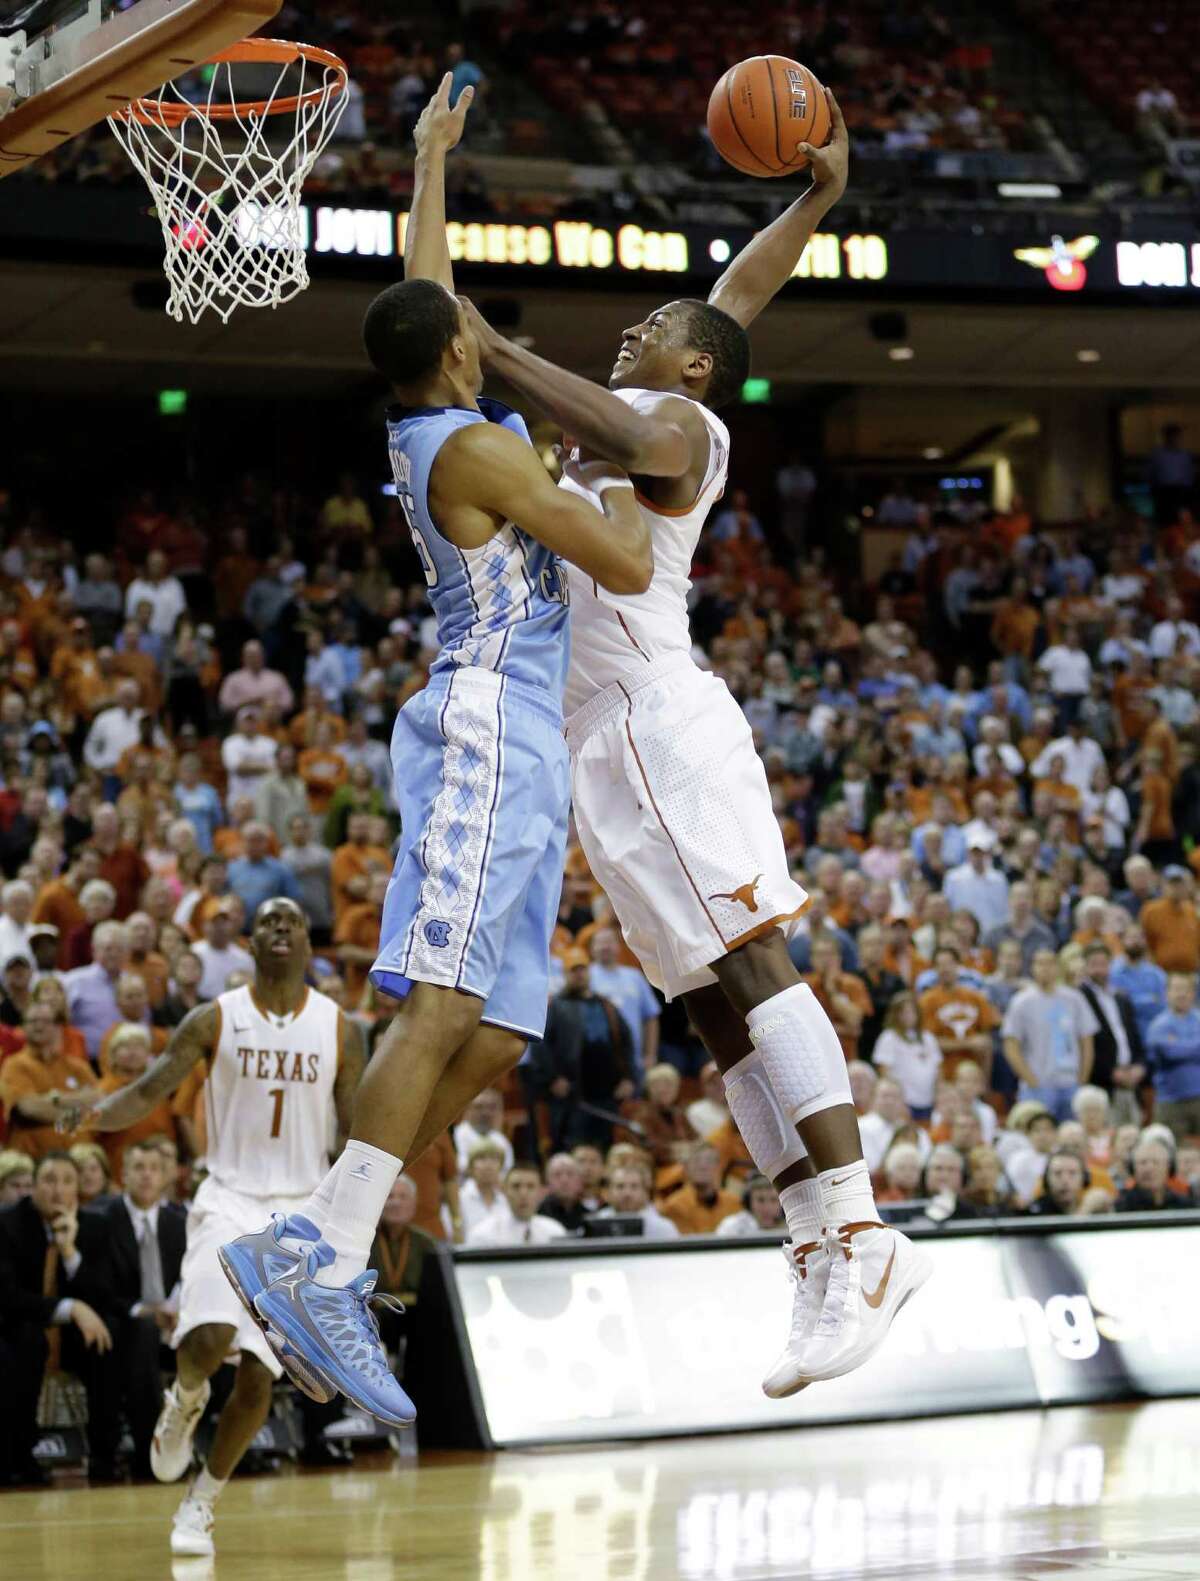 Texas' Jonathan Holmes, right, scores over North Carolina's J.P. Tokoto, left, during the second half of an NCAA college basketball game on Wednesday, Dec. 19, 2012, in Austin, Texas. Texas won 85-67. (AP Photo/Eric Gay)